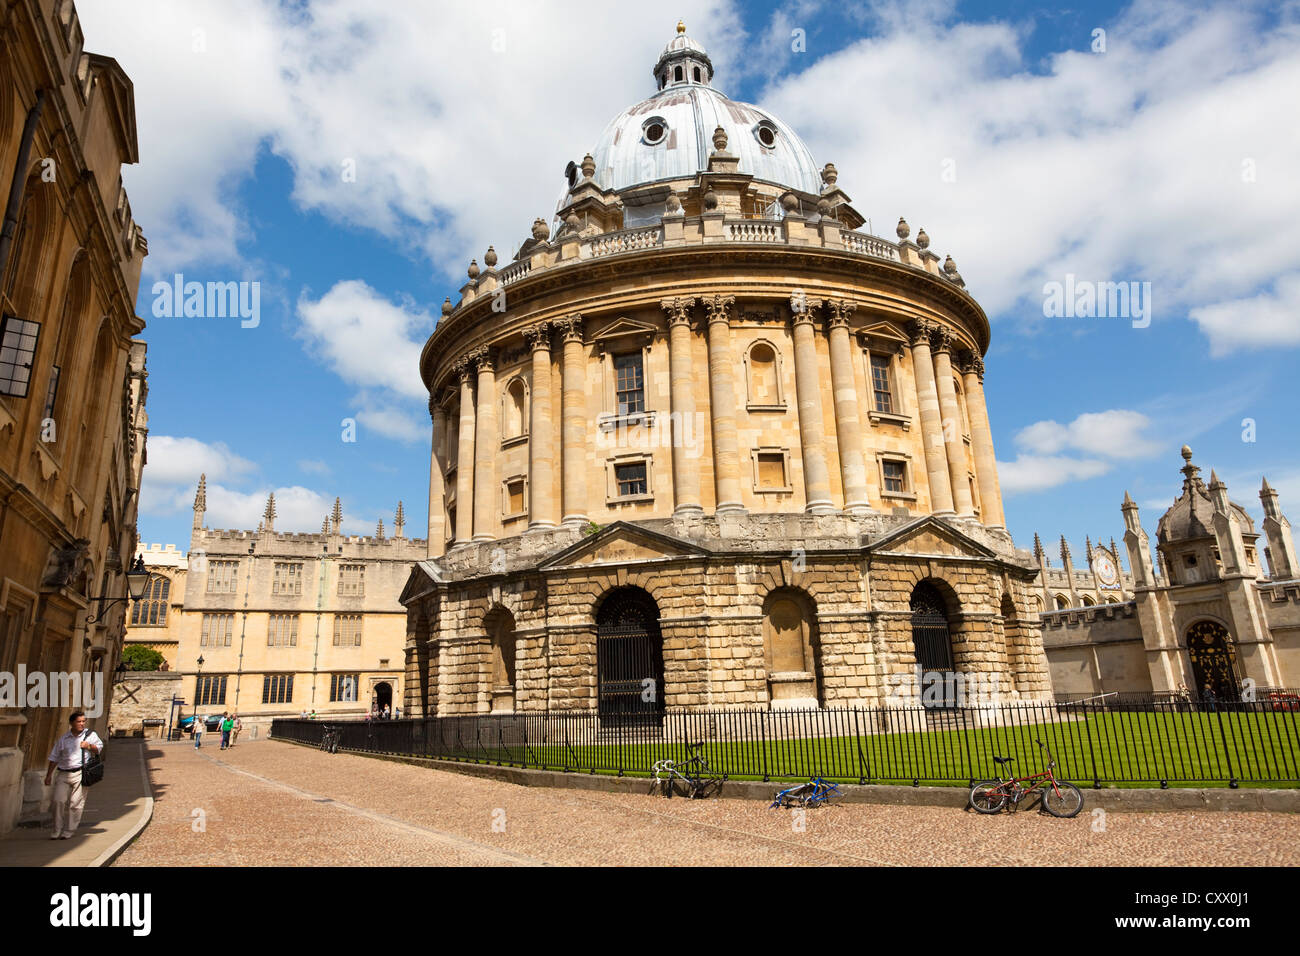 View of the Radcliffe Camera building, Oxford, UK Stock Photo